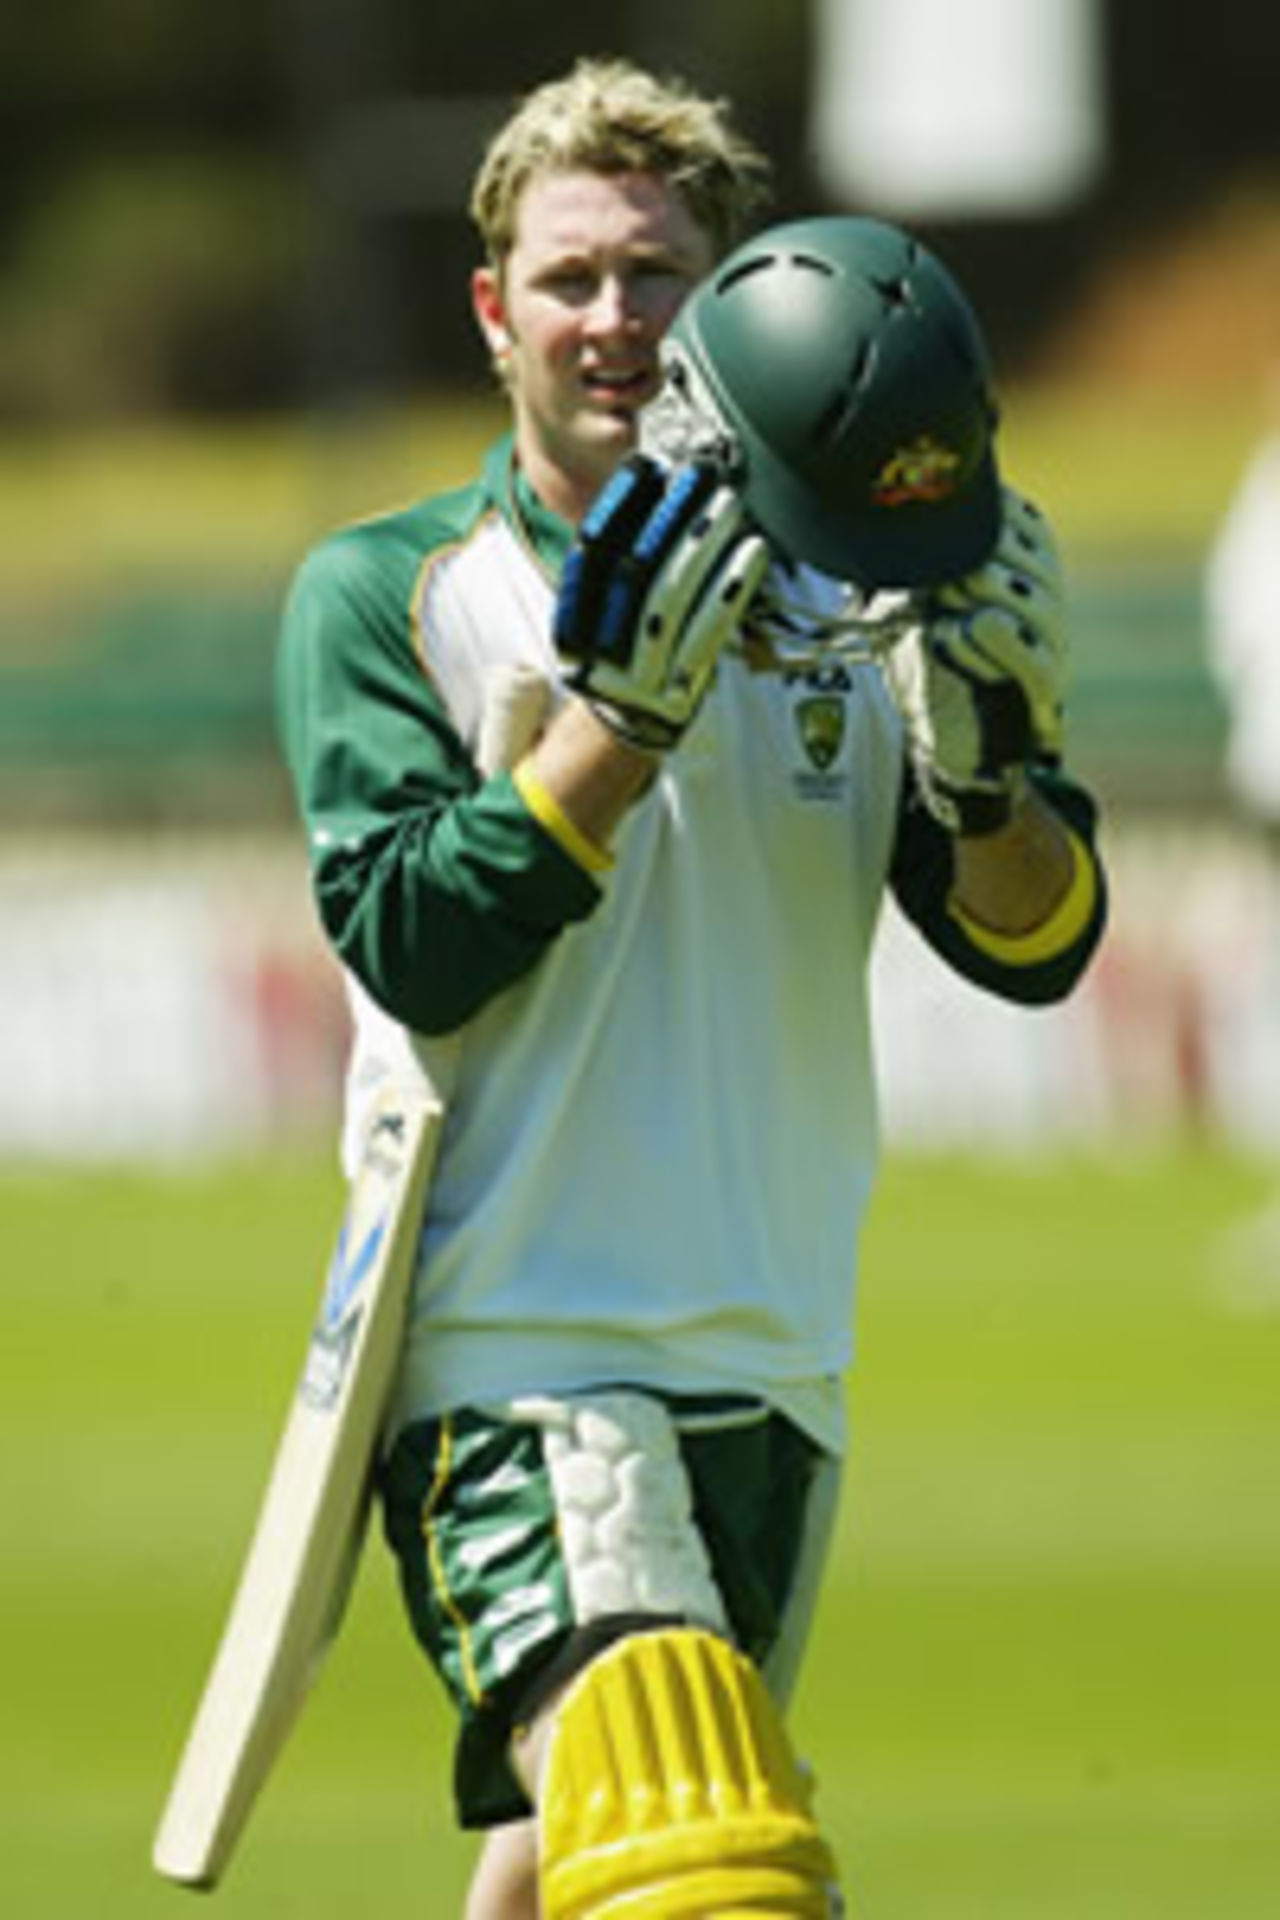 Michael Clarke of Australia looks on during training at the Junction Oval on February 5, 2004 in Melbourne, Australia.